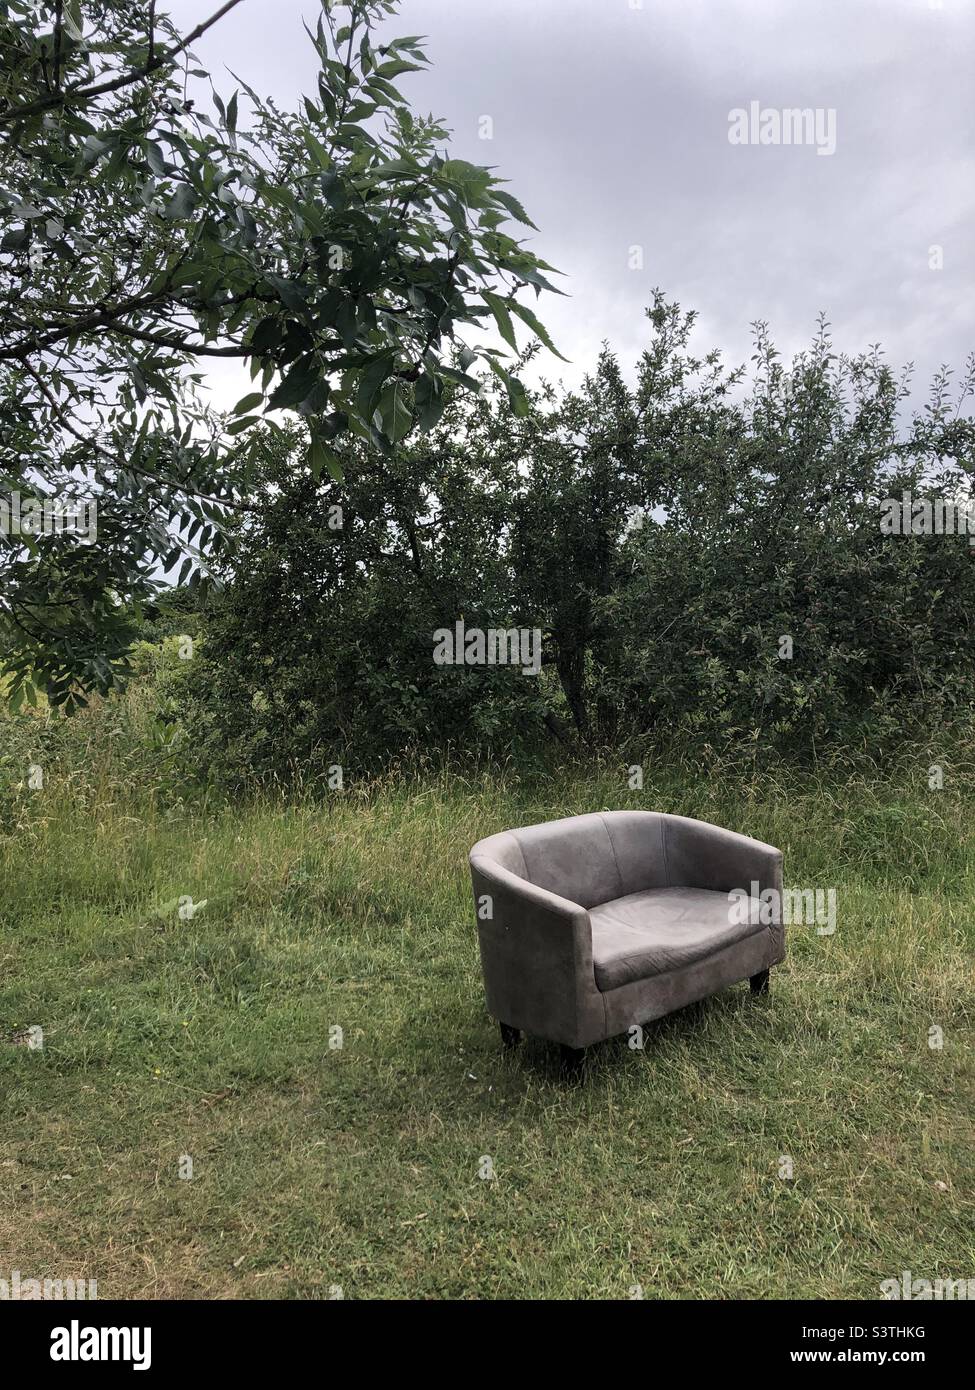 Sofa left in a field Stock Photo